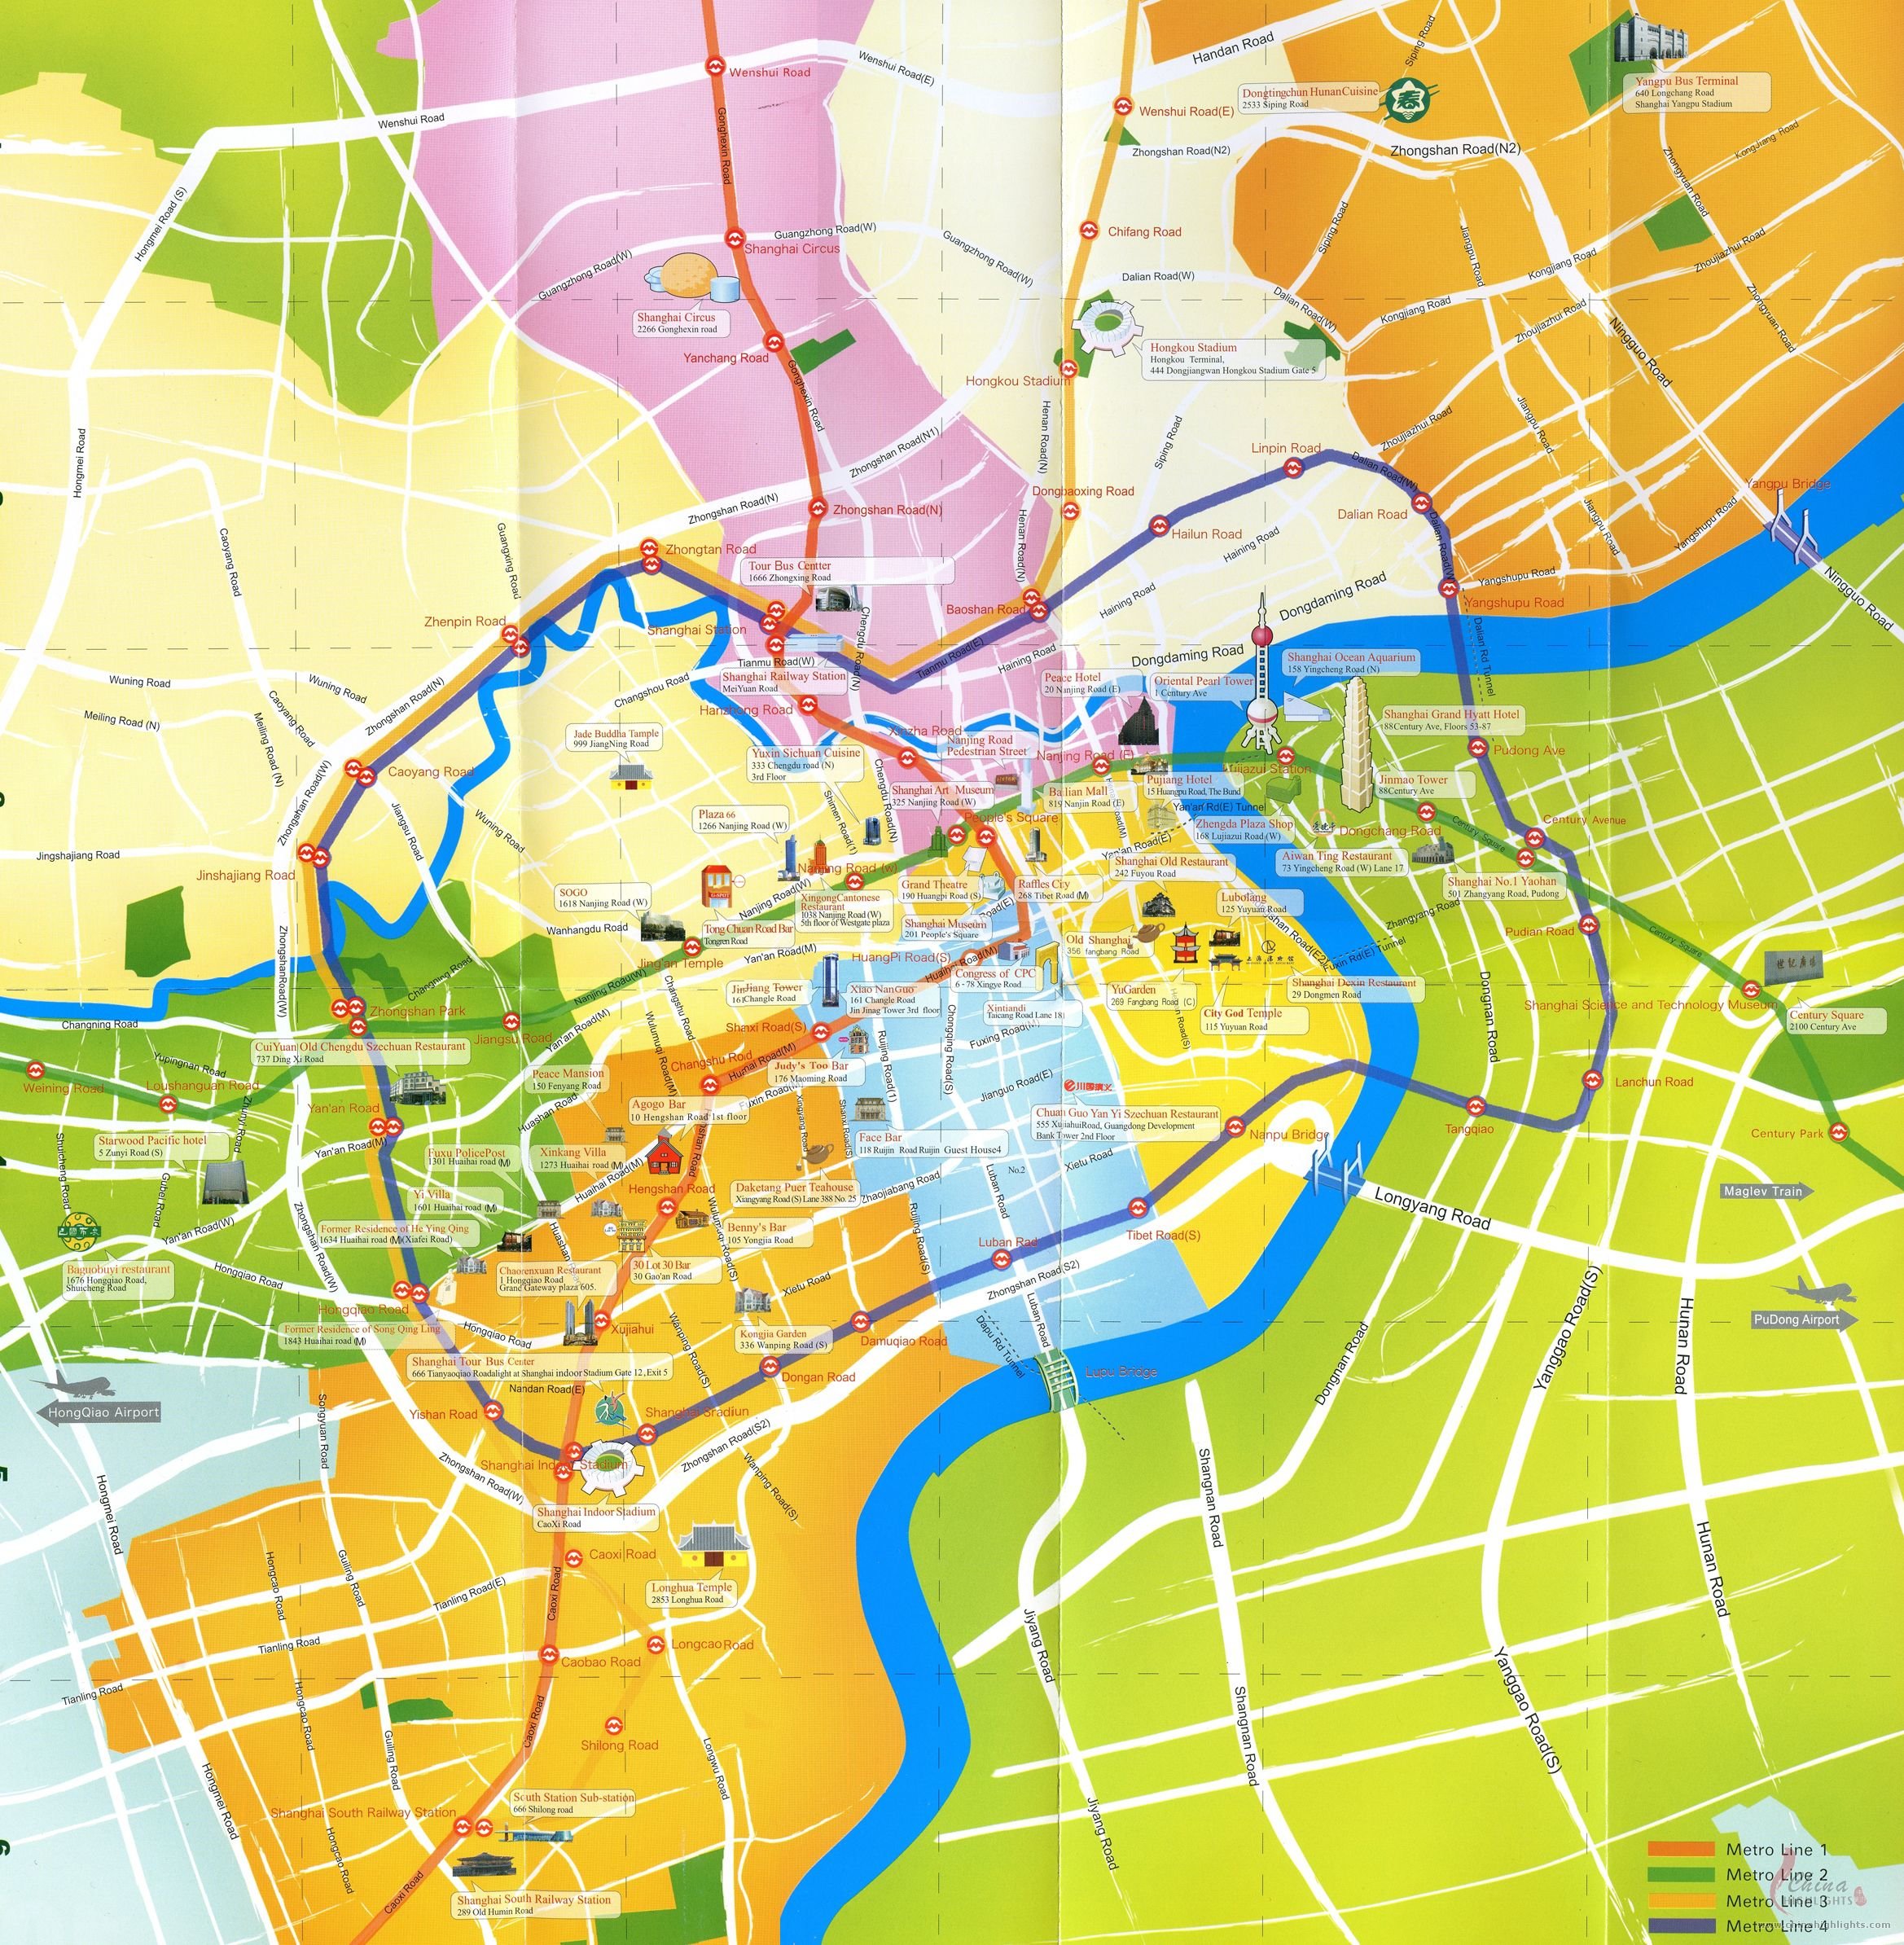 Shanghai Map, Map of Shanghai's Tourist Attractions and Subway